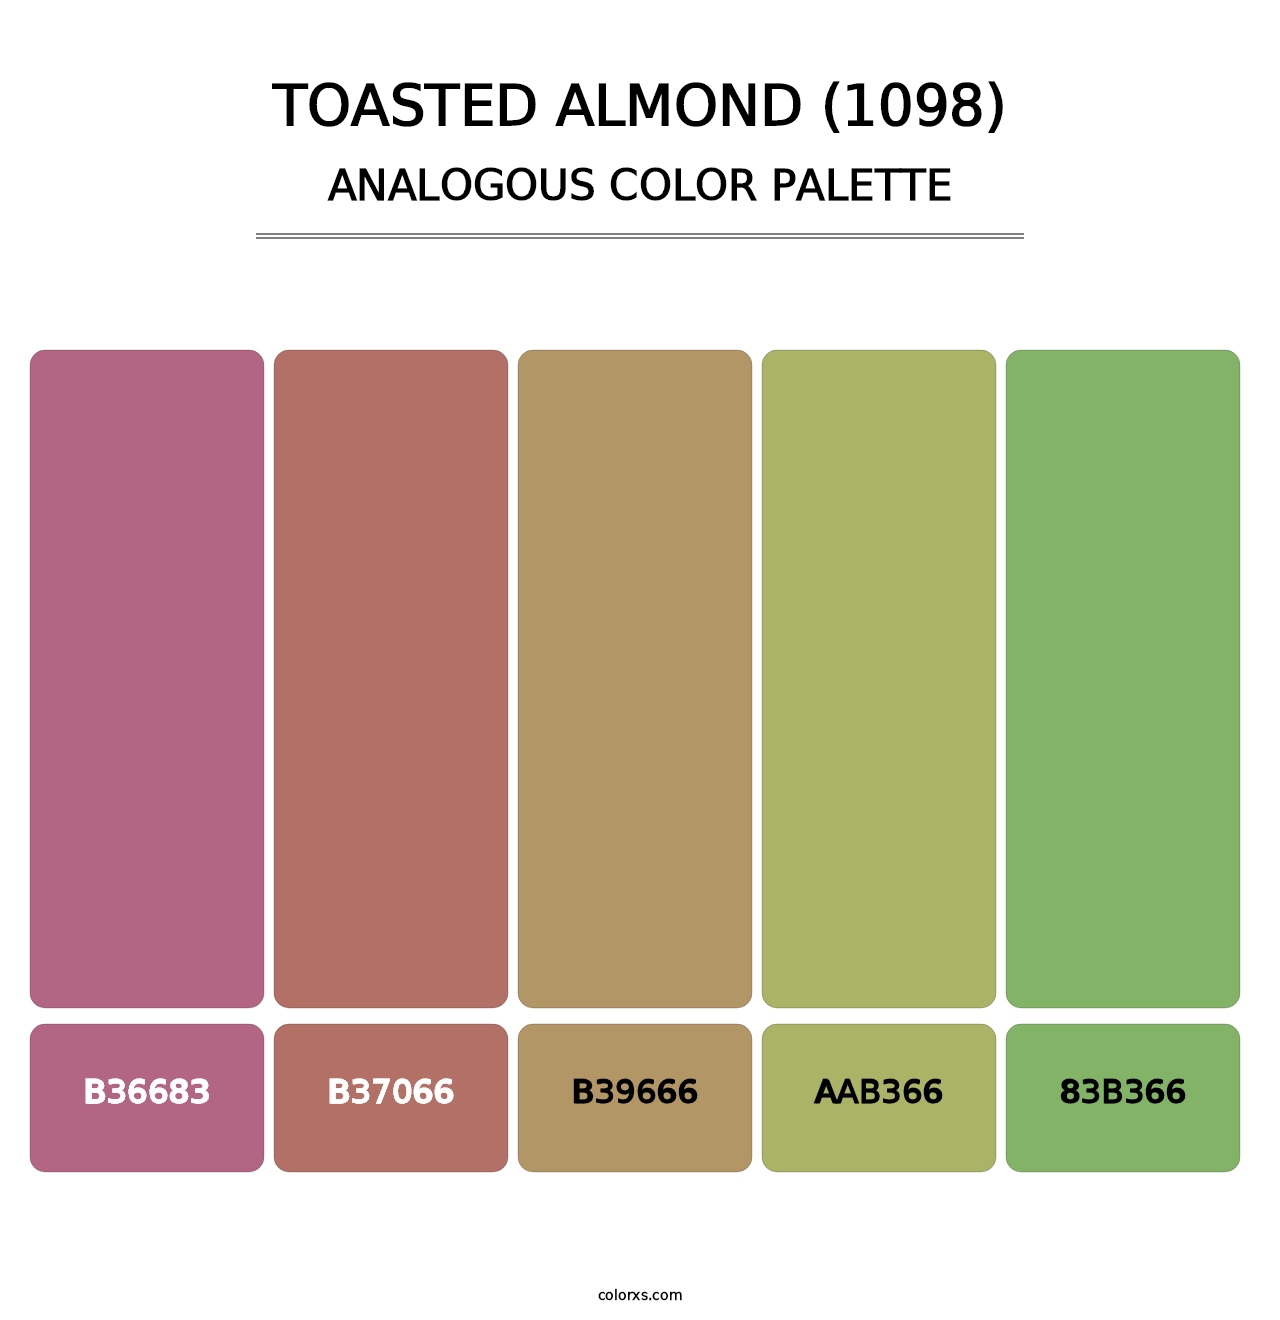 Toasted Almond (1098) - Analogous Color Palette